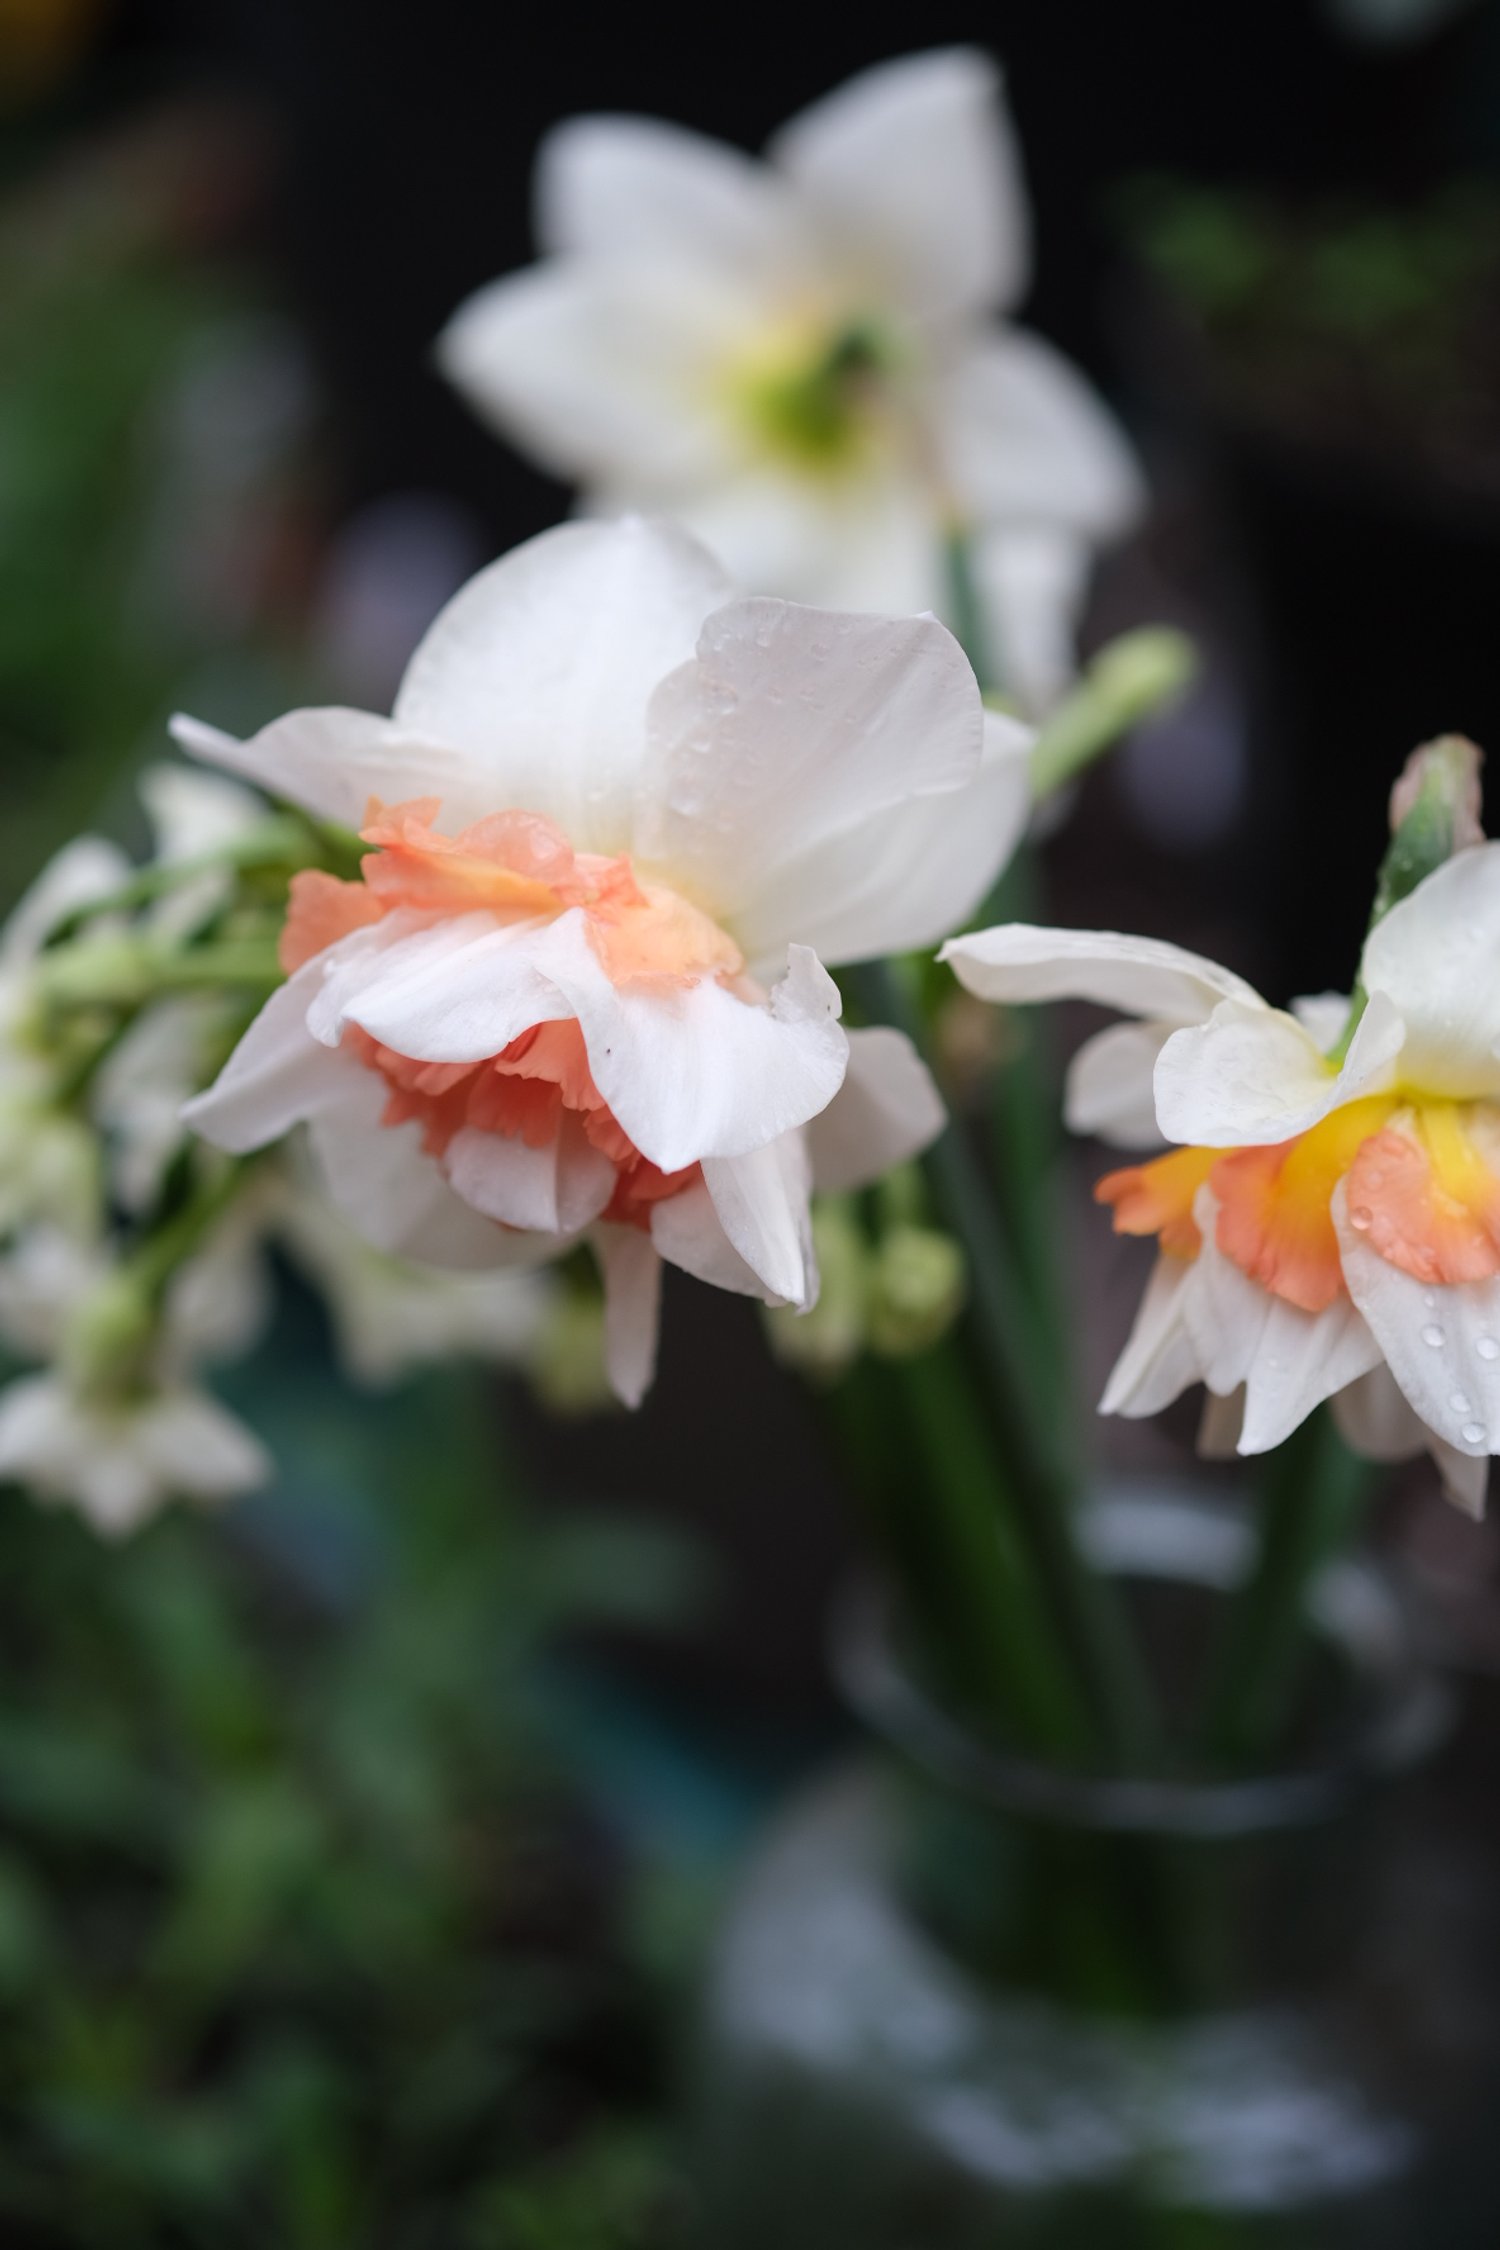 Grown narcissi by The Garden Gate Flower Company